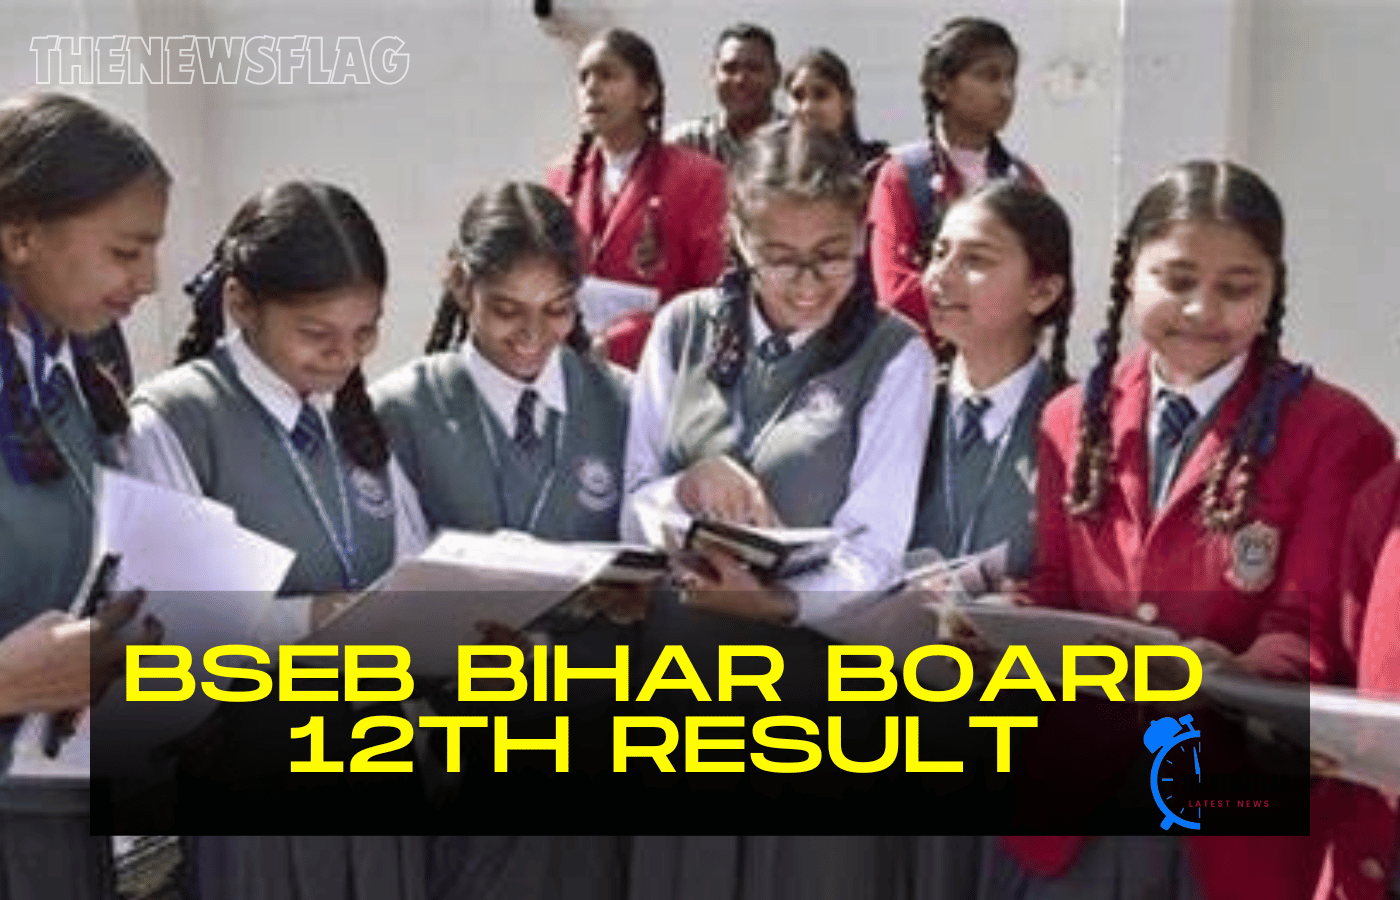 Live updates on the BSEB Bihar Board 12th Result: Know how to check your score and expect result dates shortly.